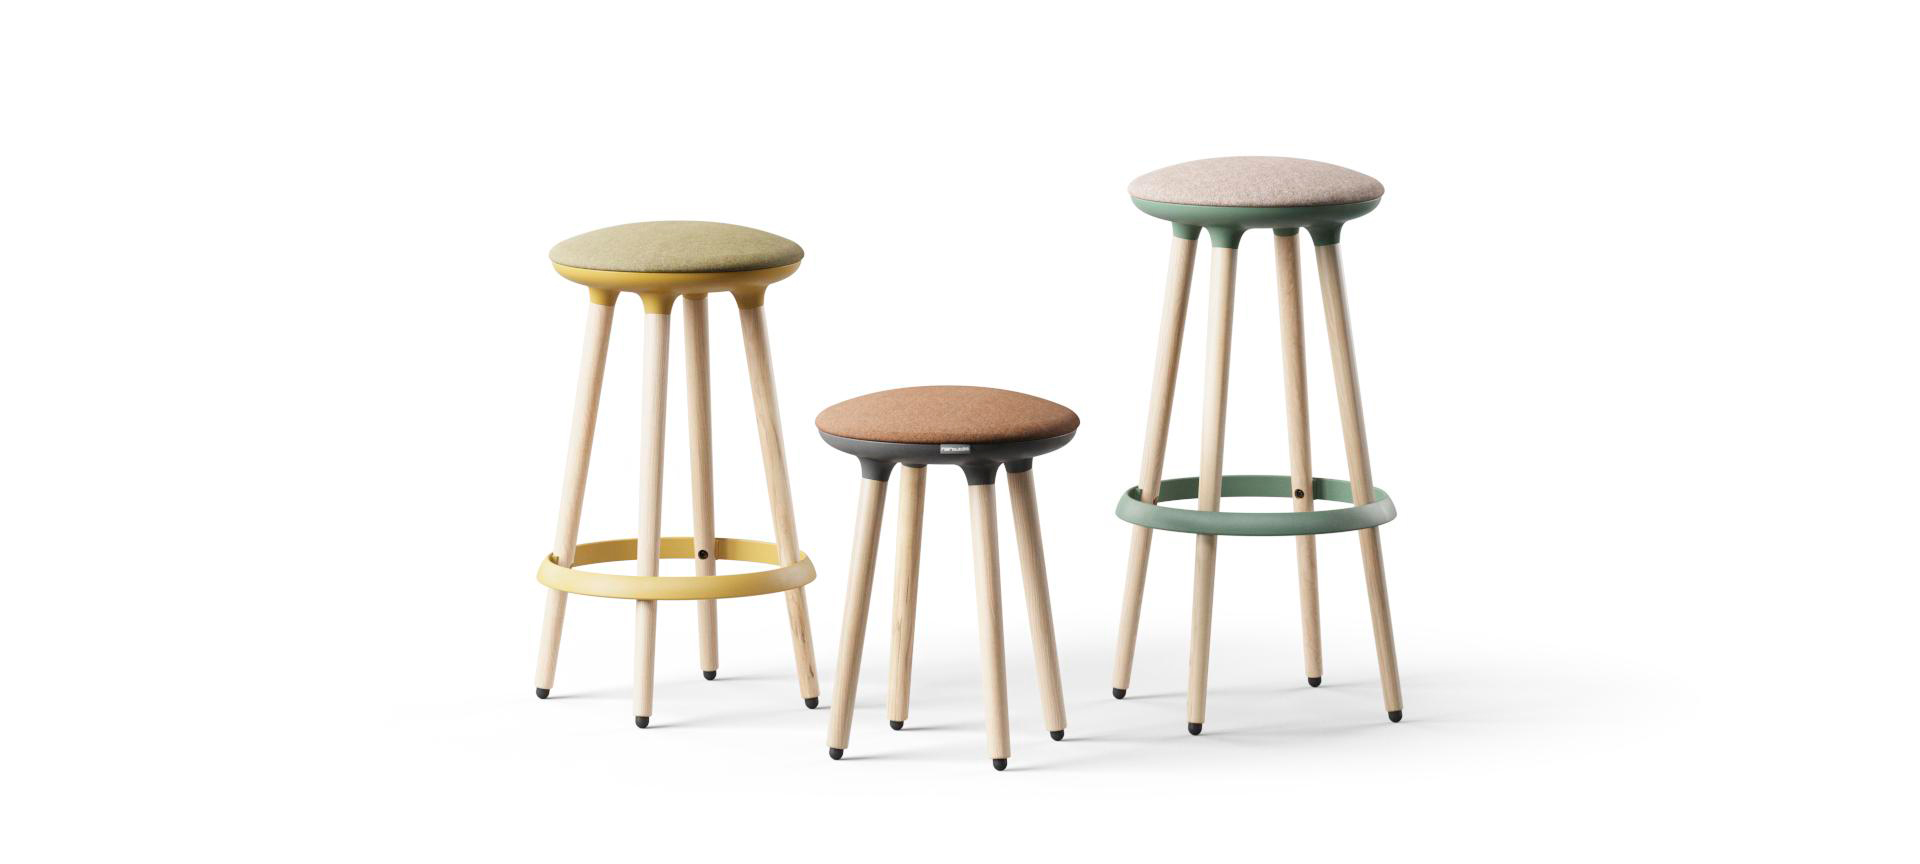 Narbutas Cannie stools